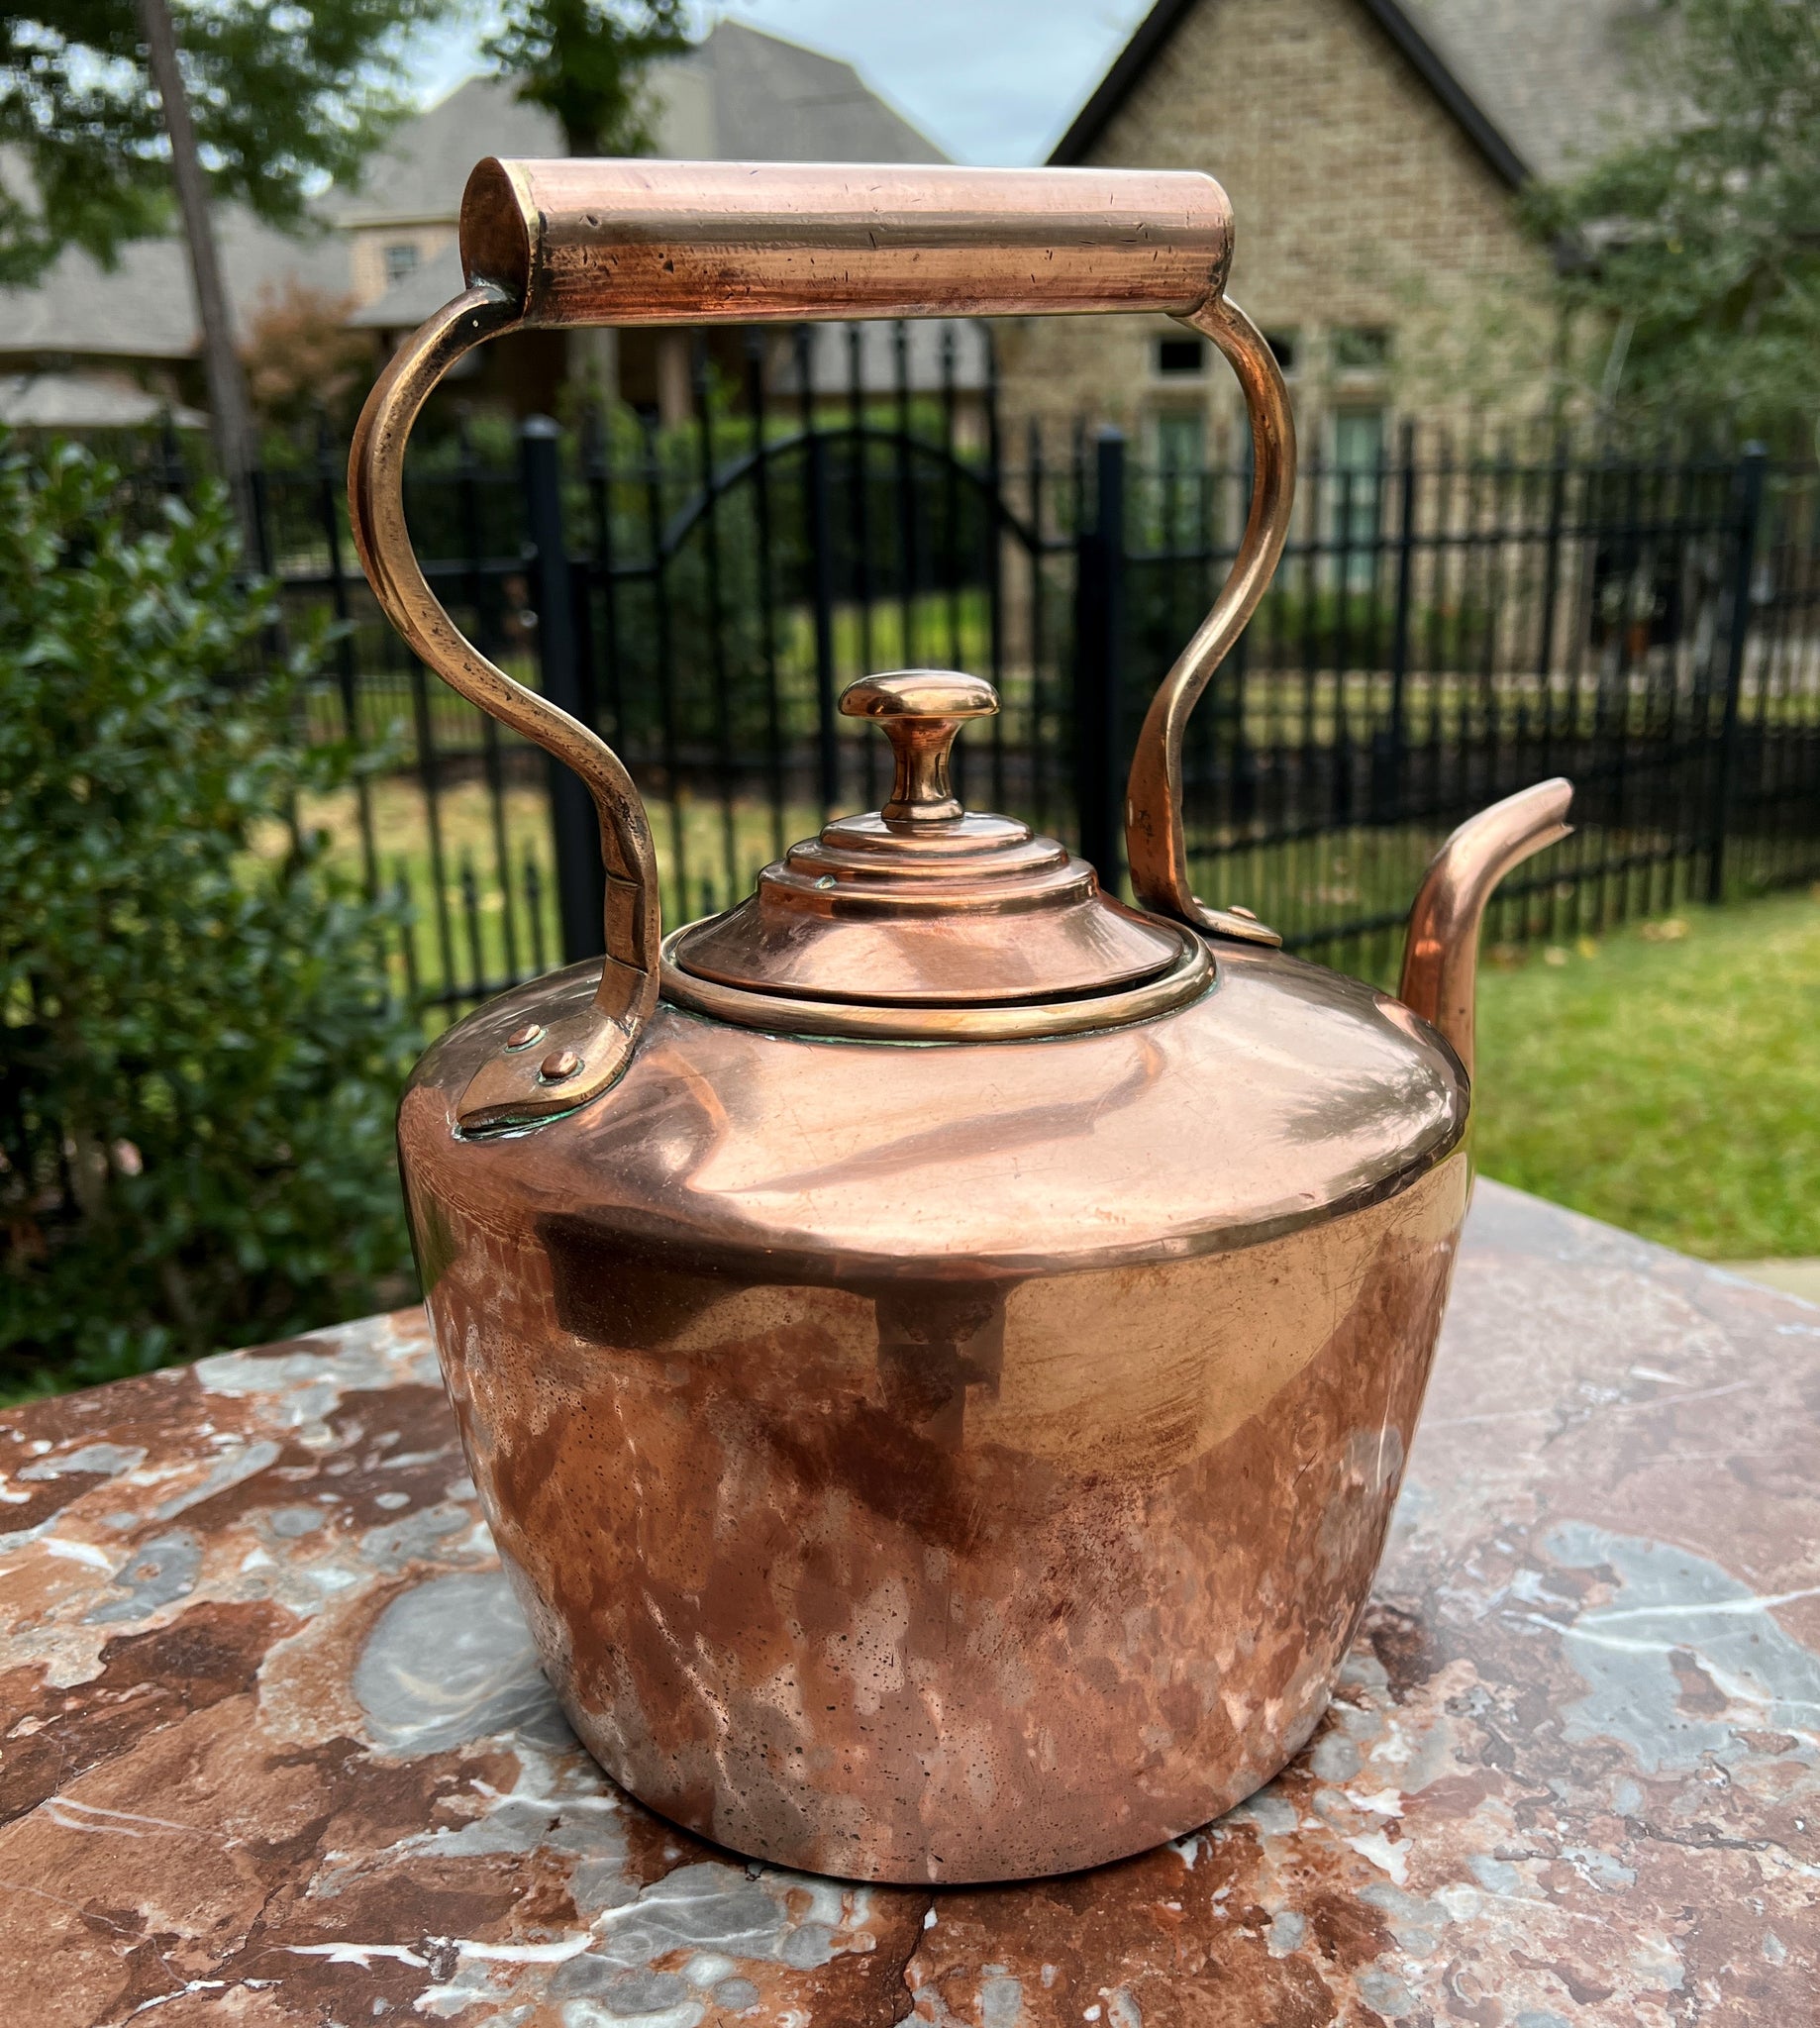 Vintage Copper Coffee/Tea Carafe Pot with Warming Stand